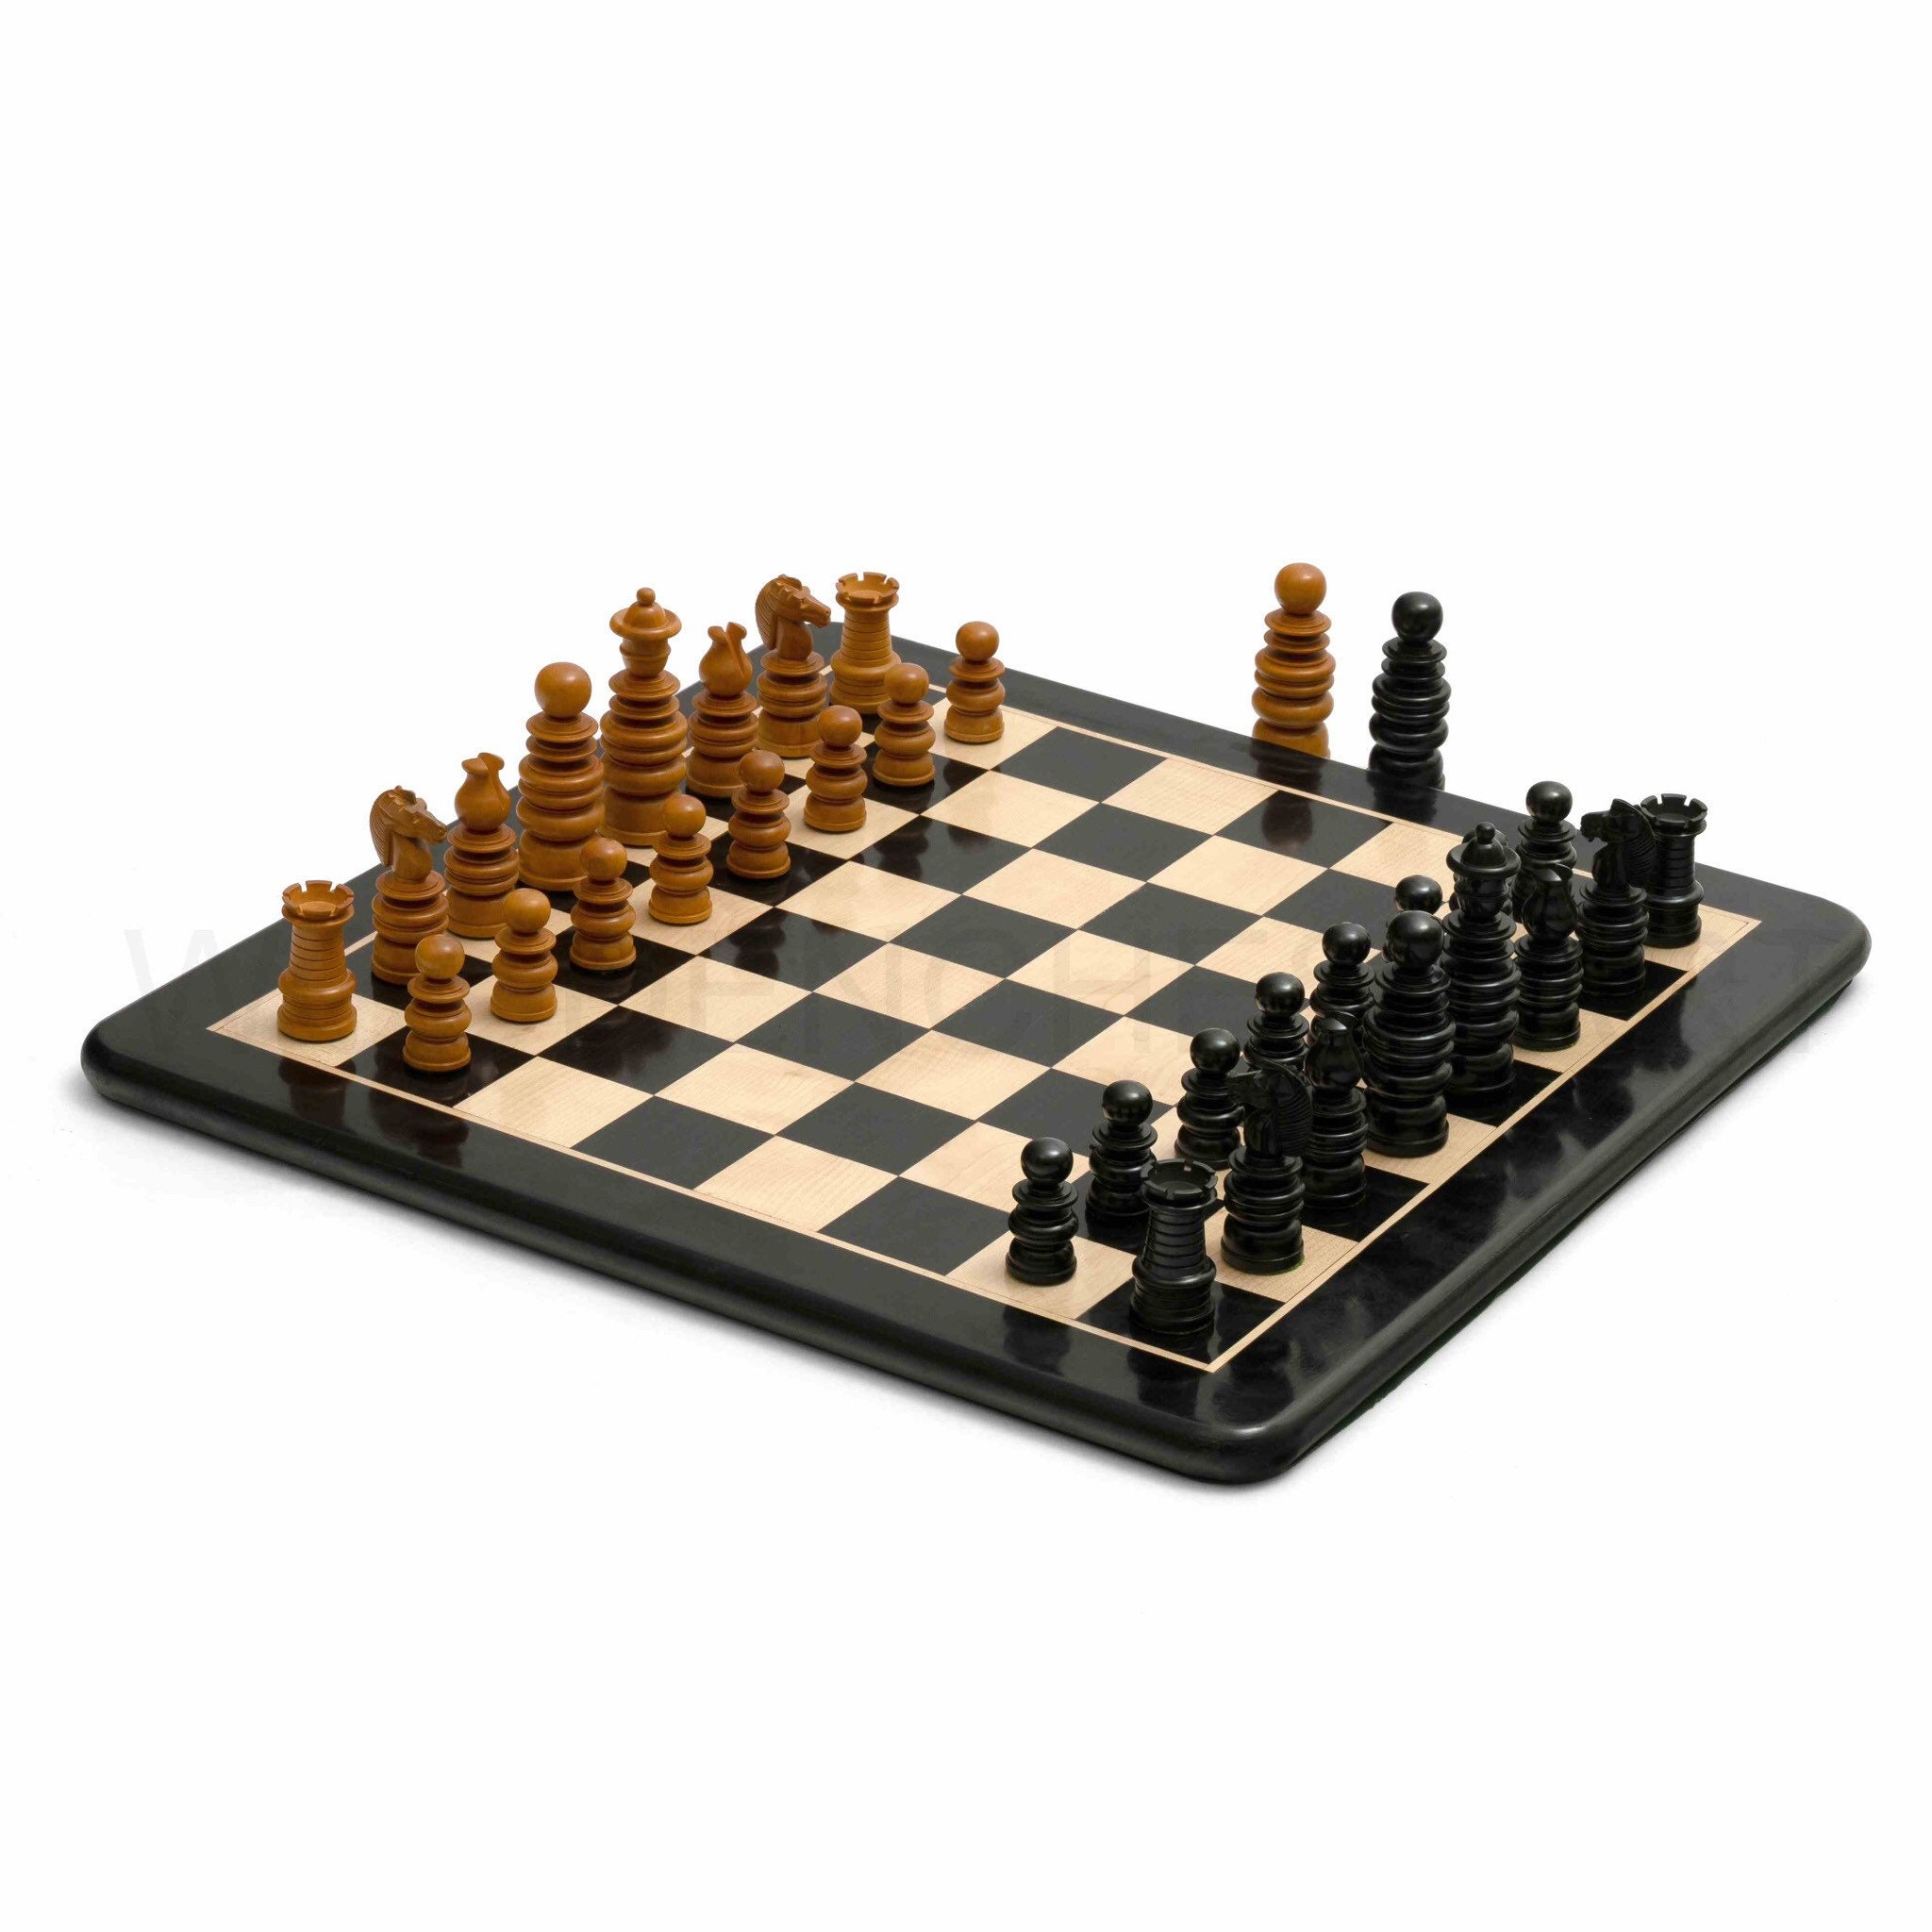 Premium Photo  A chess board with on chess pieces white and black figures  position on a chessboard